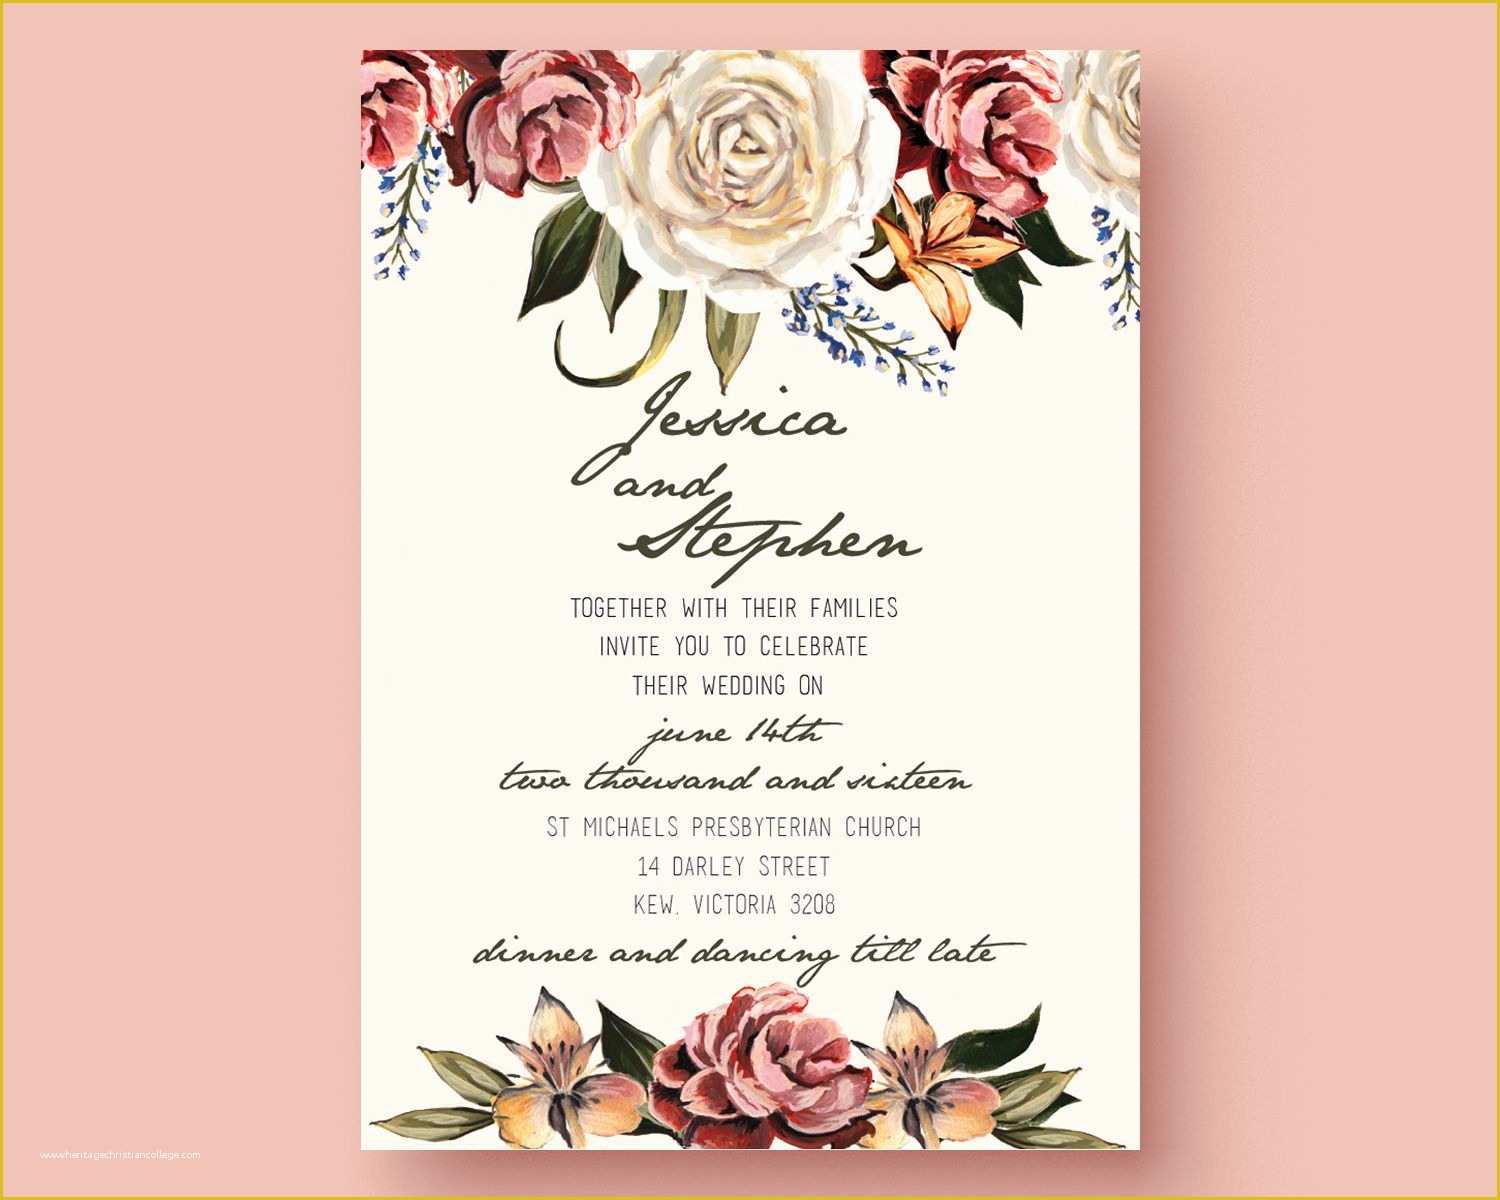 Wedding Card Design Template Free Download Of Get the Template Free This is An Adobe